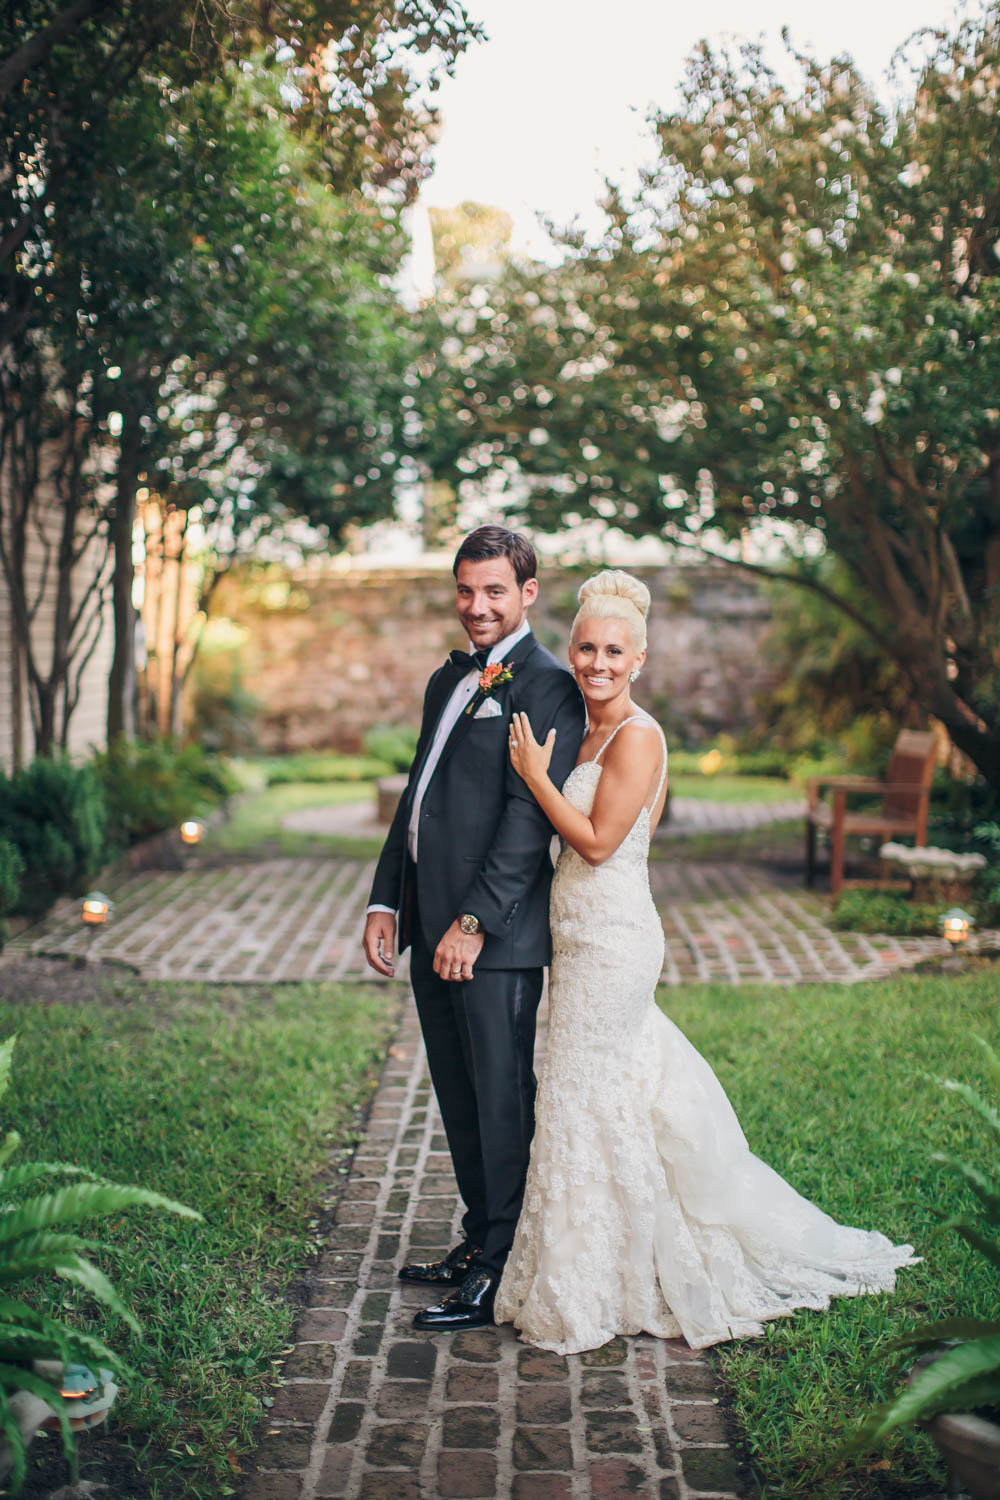 Jenna and Michael – Rich Bell Photography